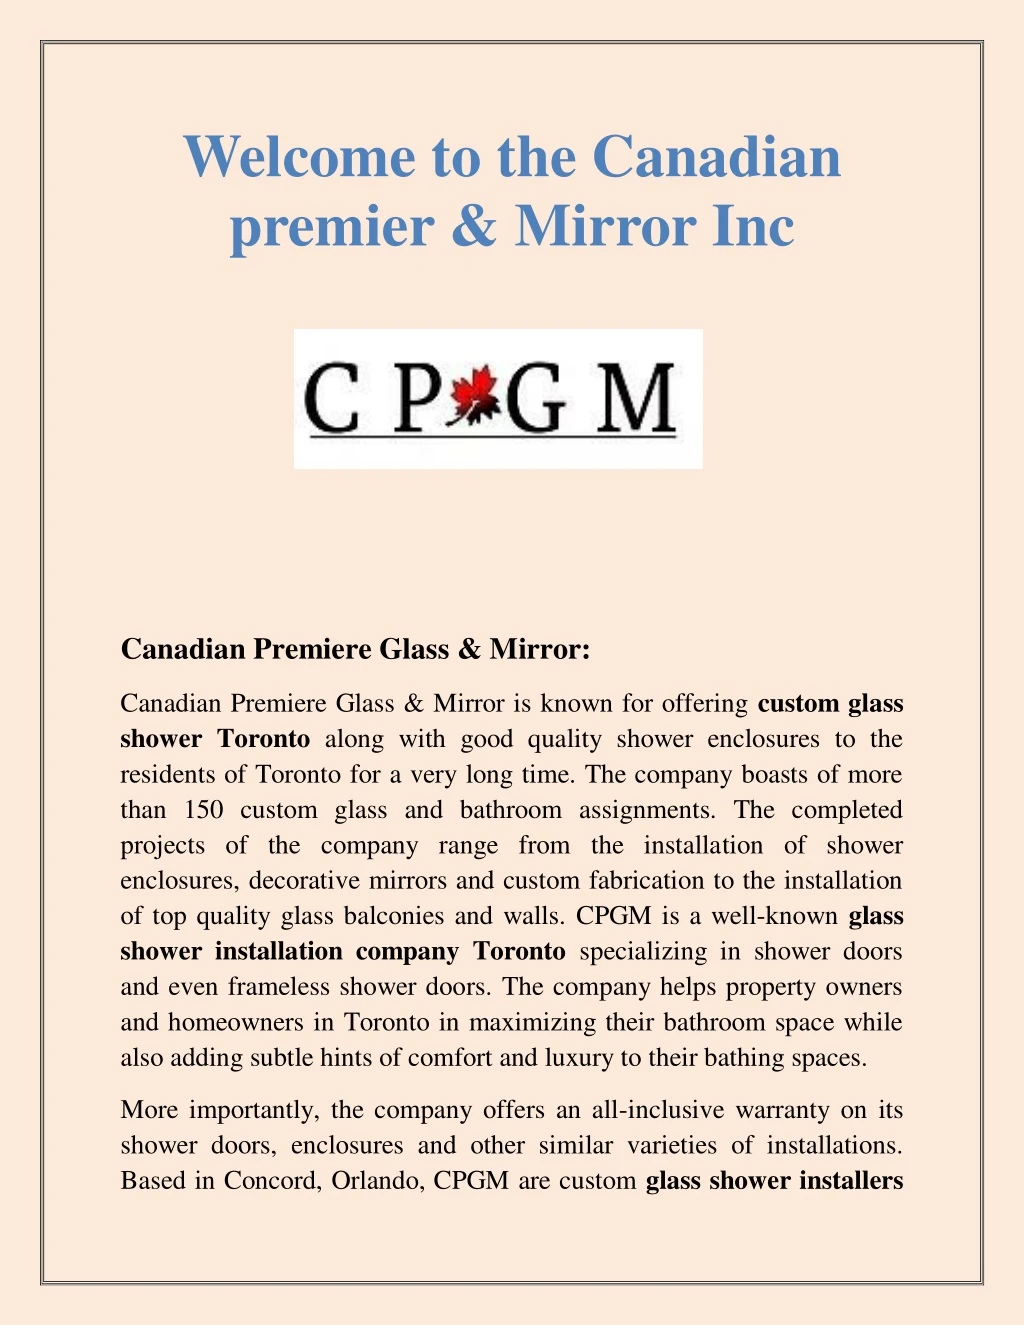 welcome to the canadian premier mirror inc